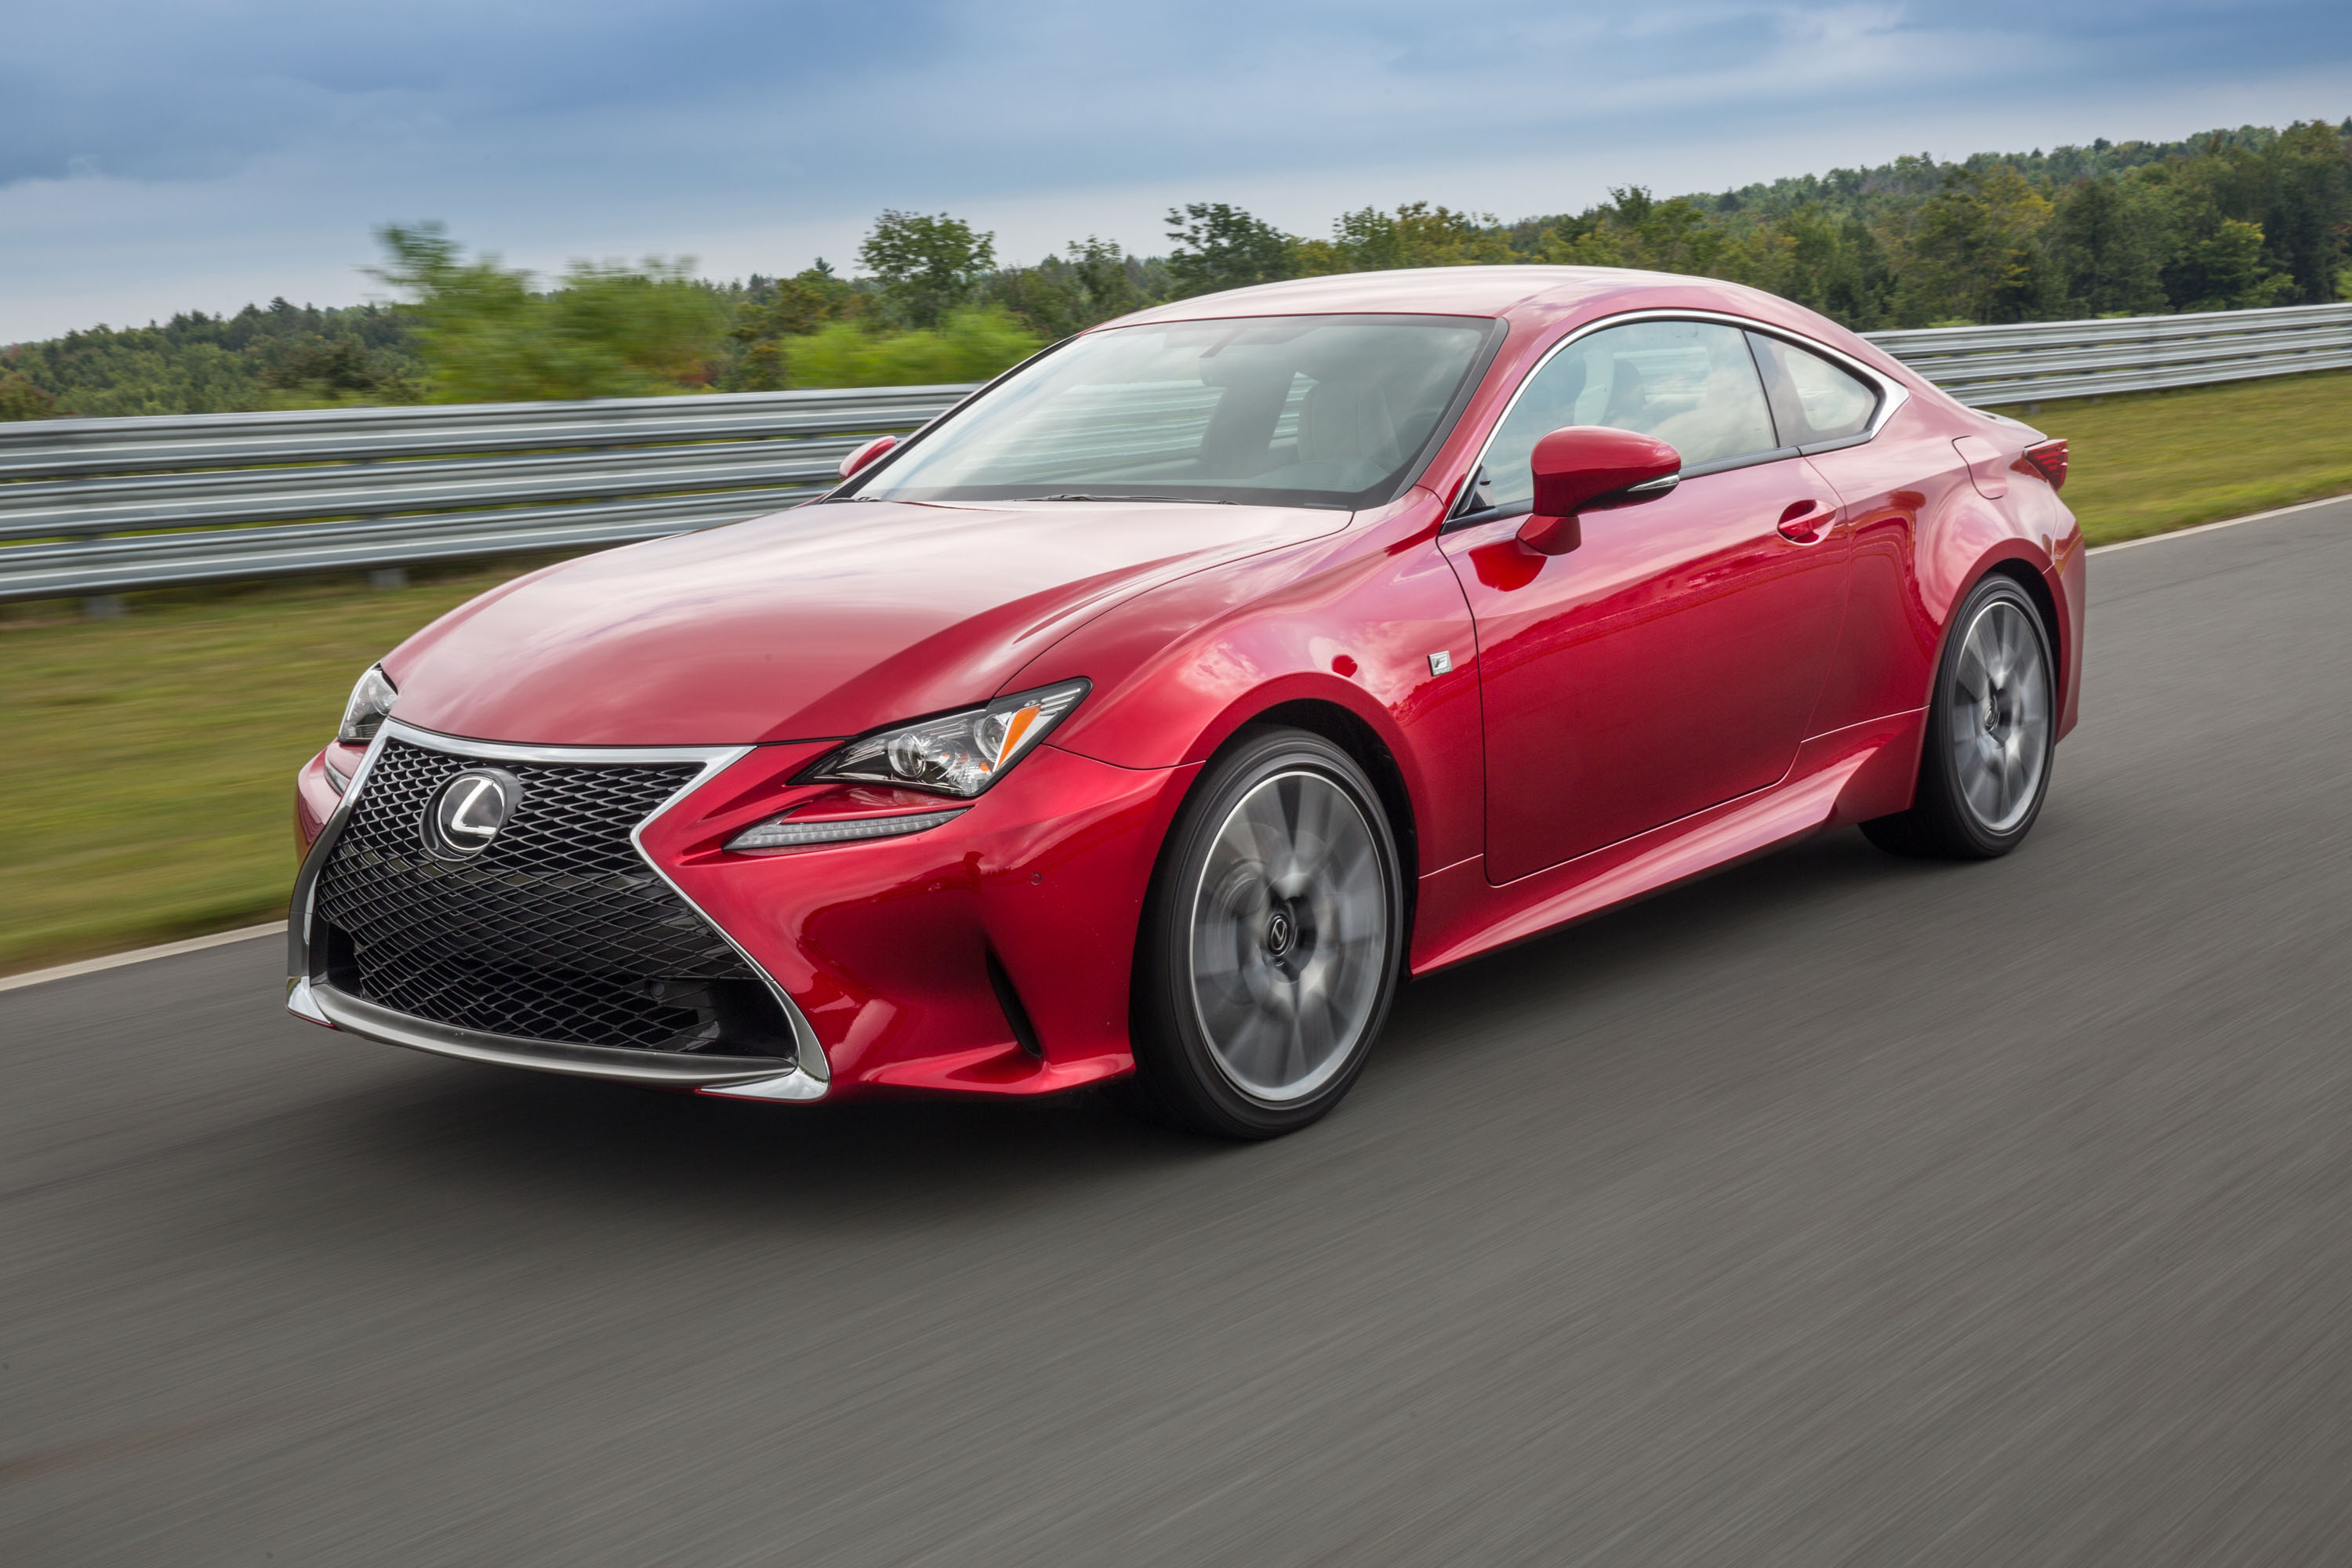 2017 Lexus RC 350 AWD: Not Quite a Sports or Luxury Car ...